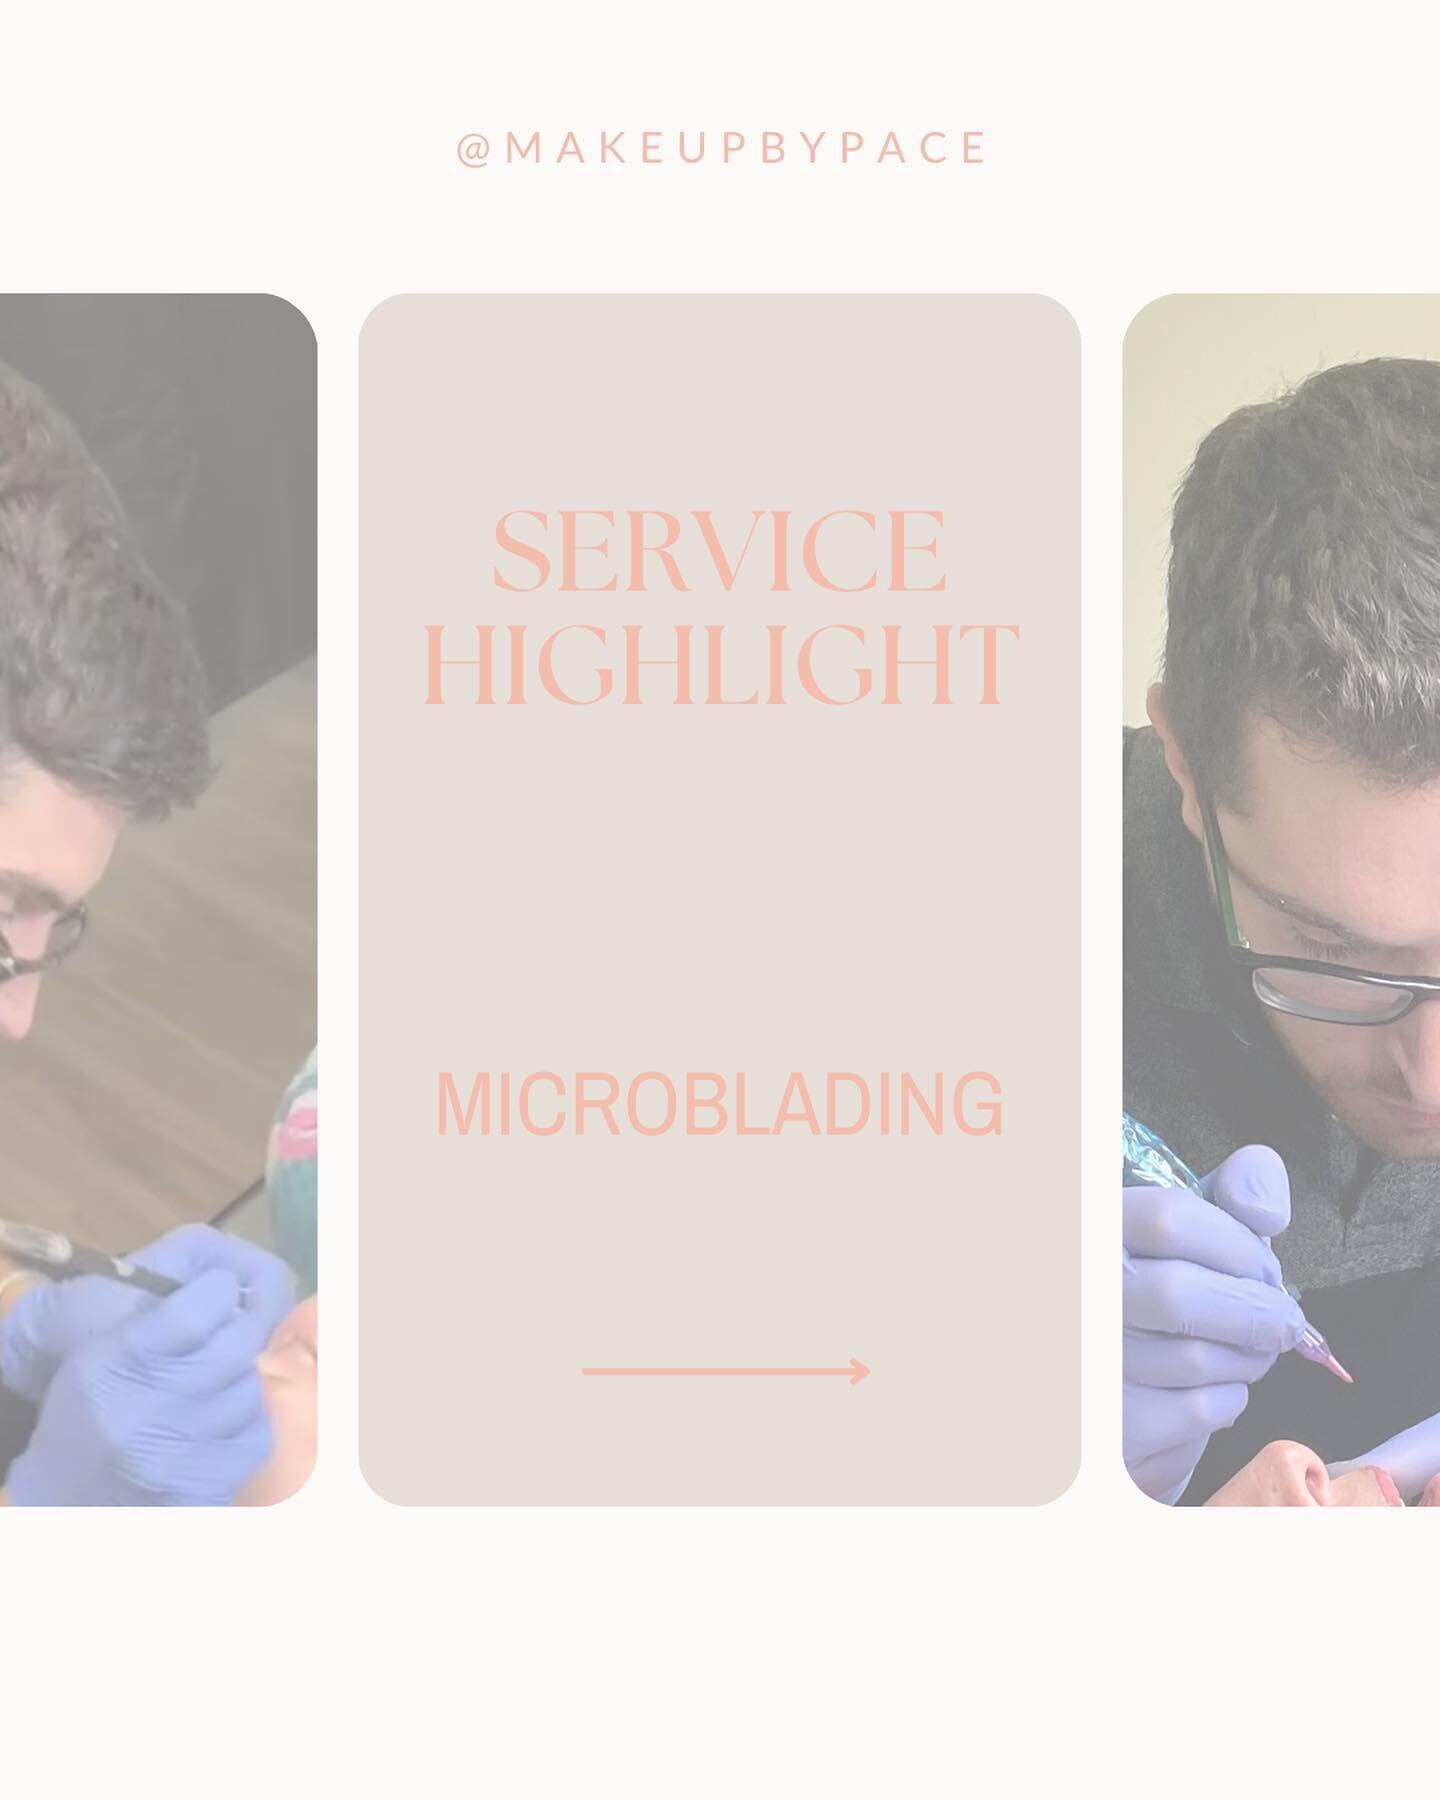 🌟 Service Highlight: Microblading combined with manual shading🌟

Wake up each morning with effortlessly beautiful brows. Our services are tailored to your individual goals achieving the look you desire. 

#microblading #browtransformation #flawless